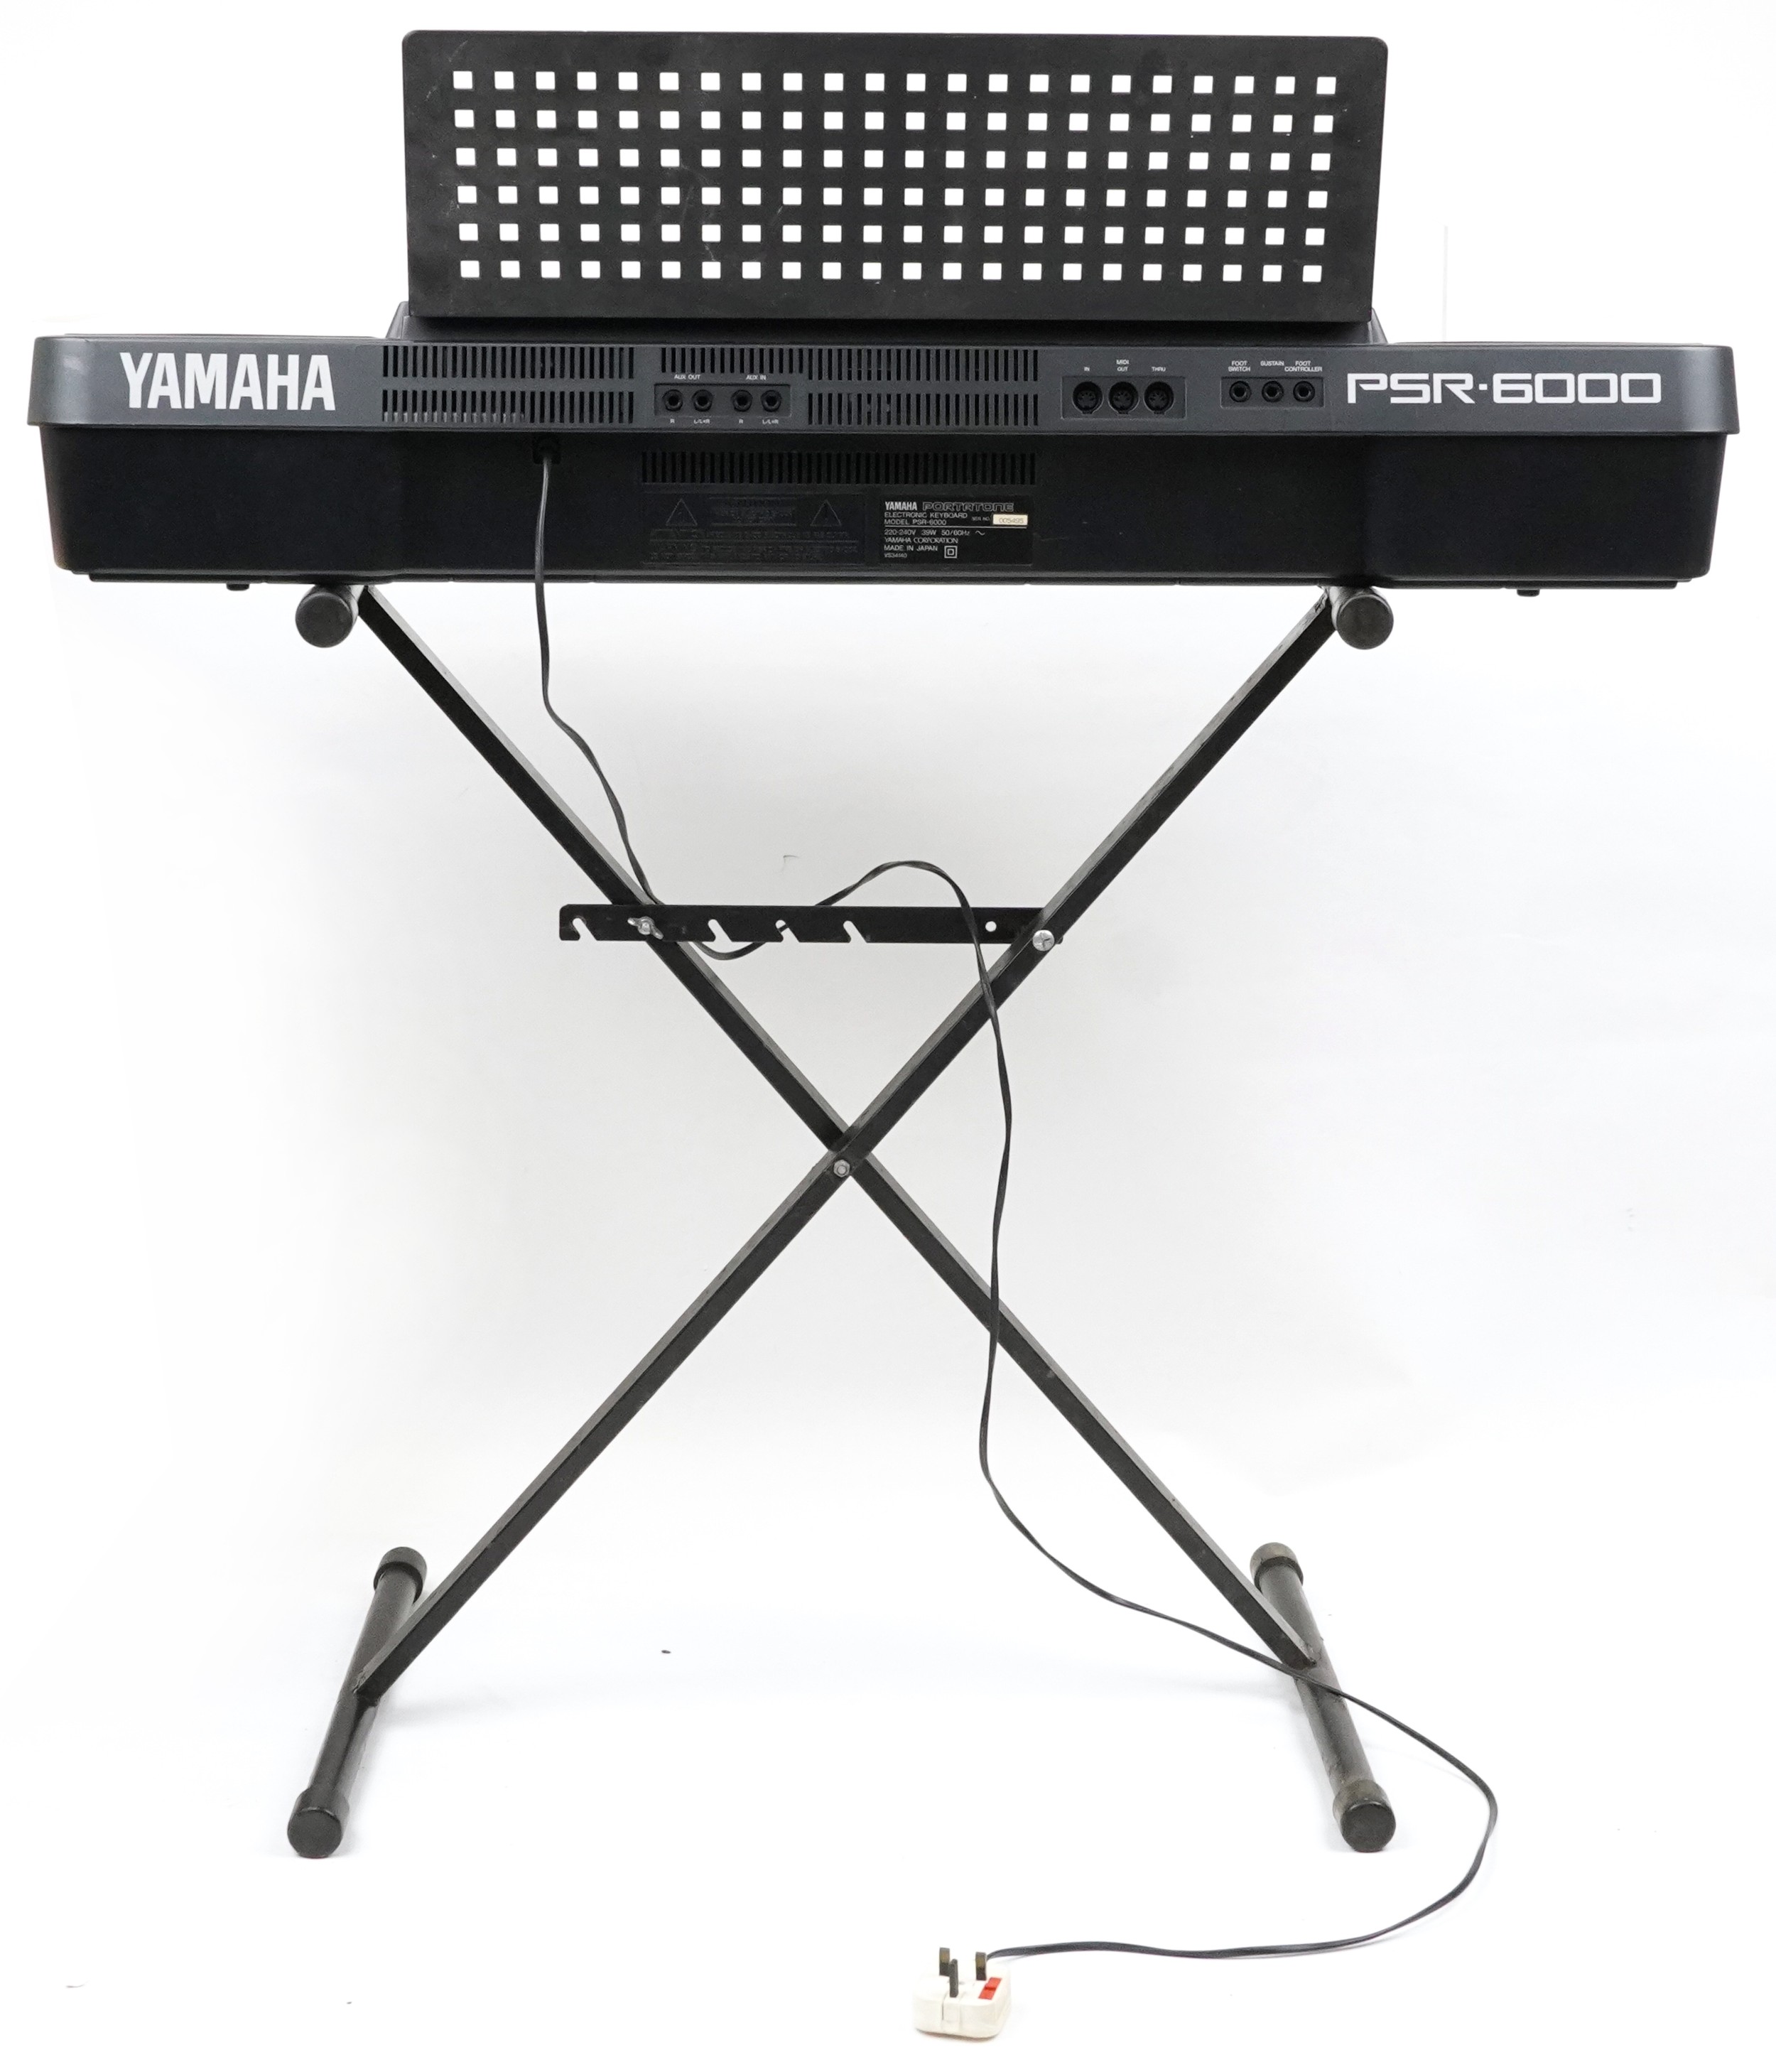 Yamaha PSR-6000 electric keyboard with stand and protective bag - Image 2 of 4